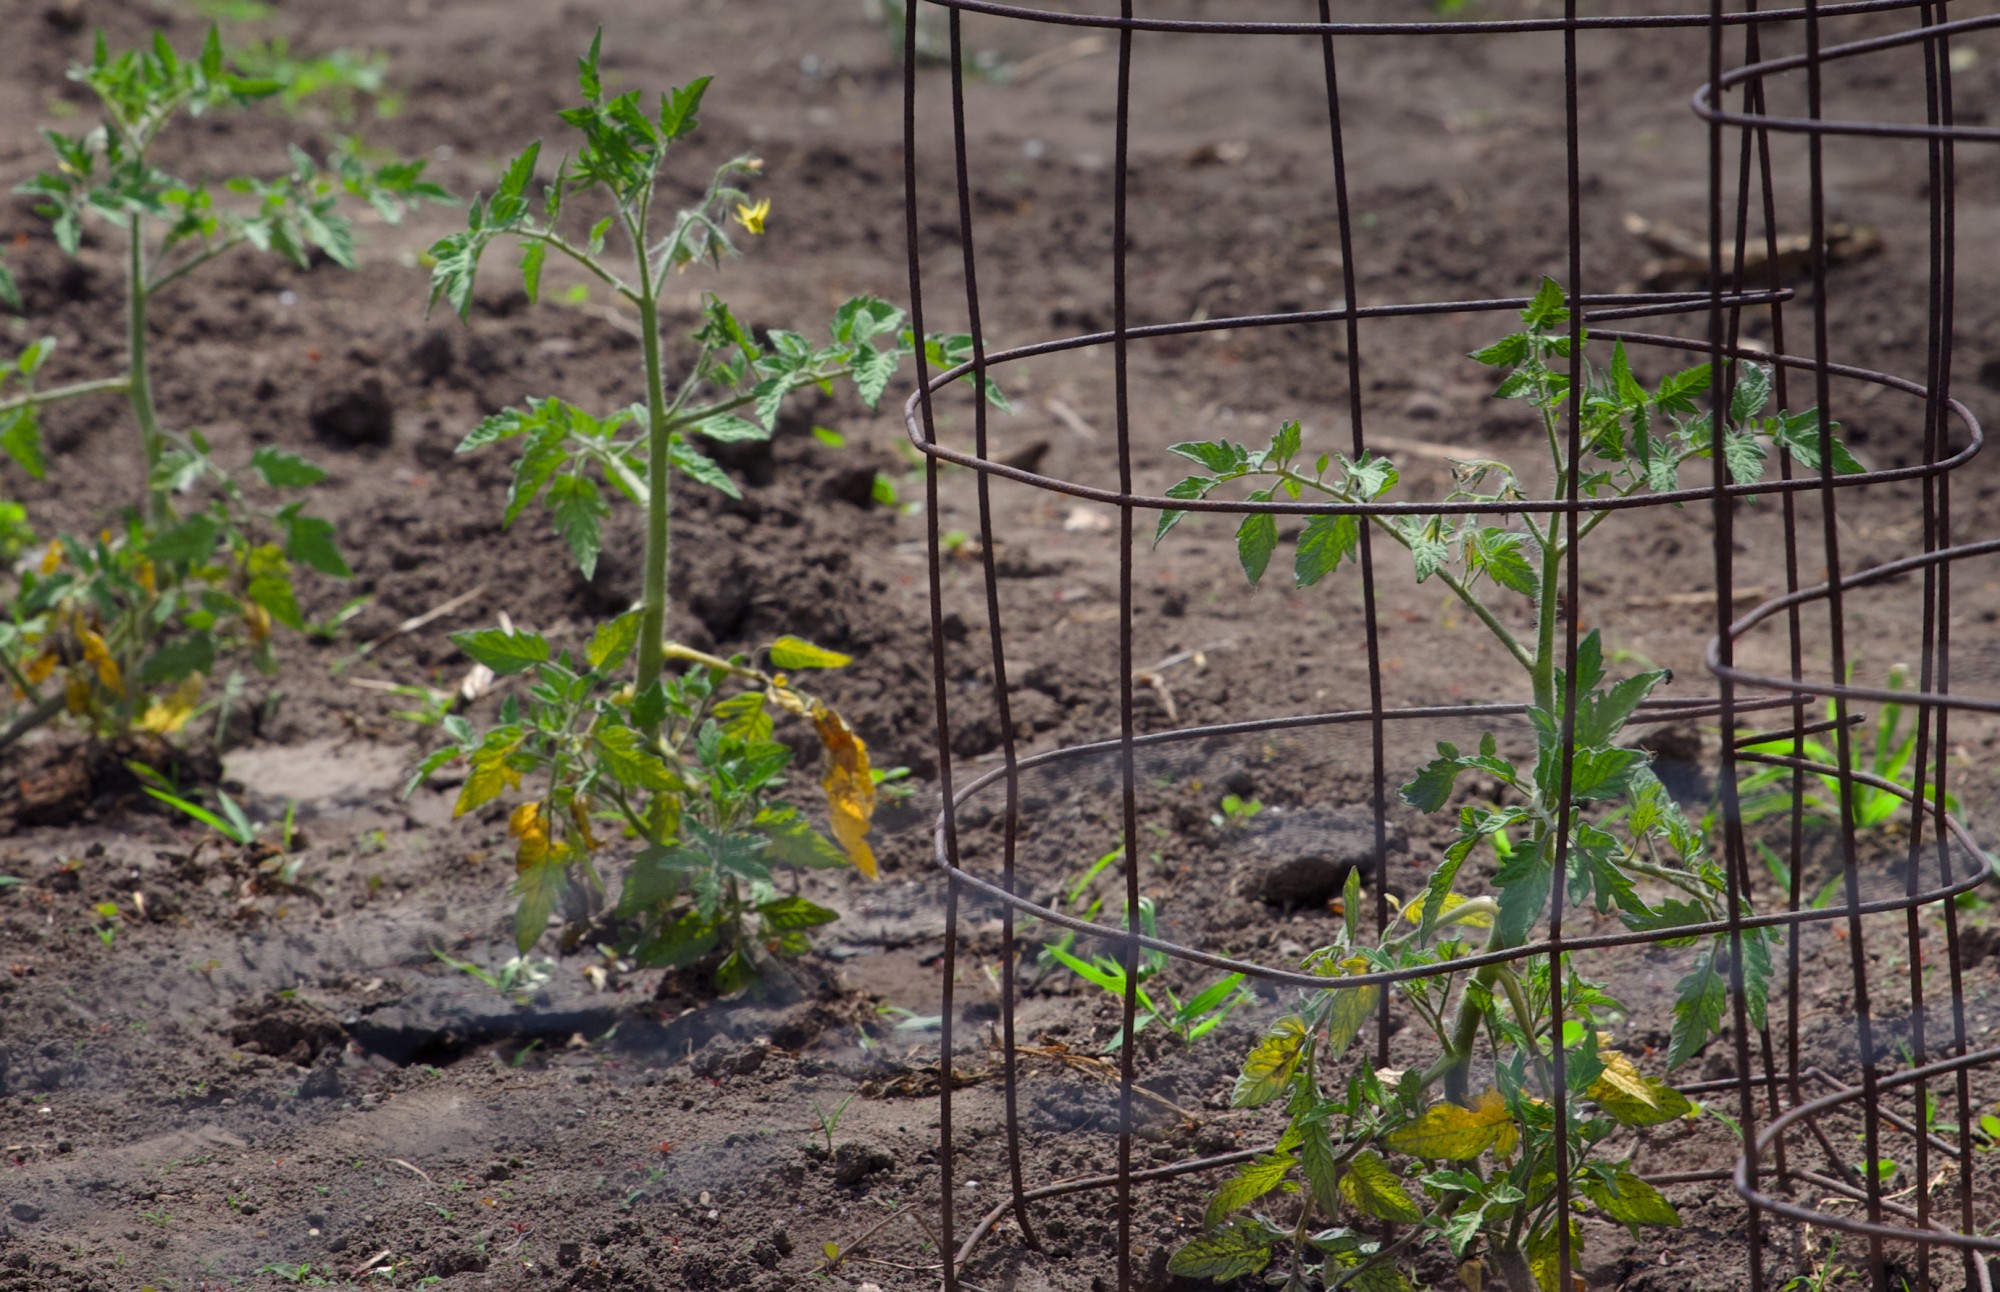 Tomato plants grow protected by wire cages in a front yard vegetable garden in Falcon Heights on Wednesday, June 15. (Audrey Rauth / Minnesota Daily)